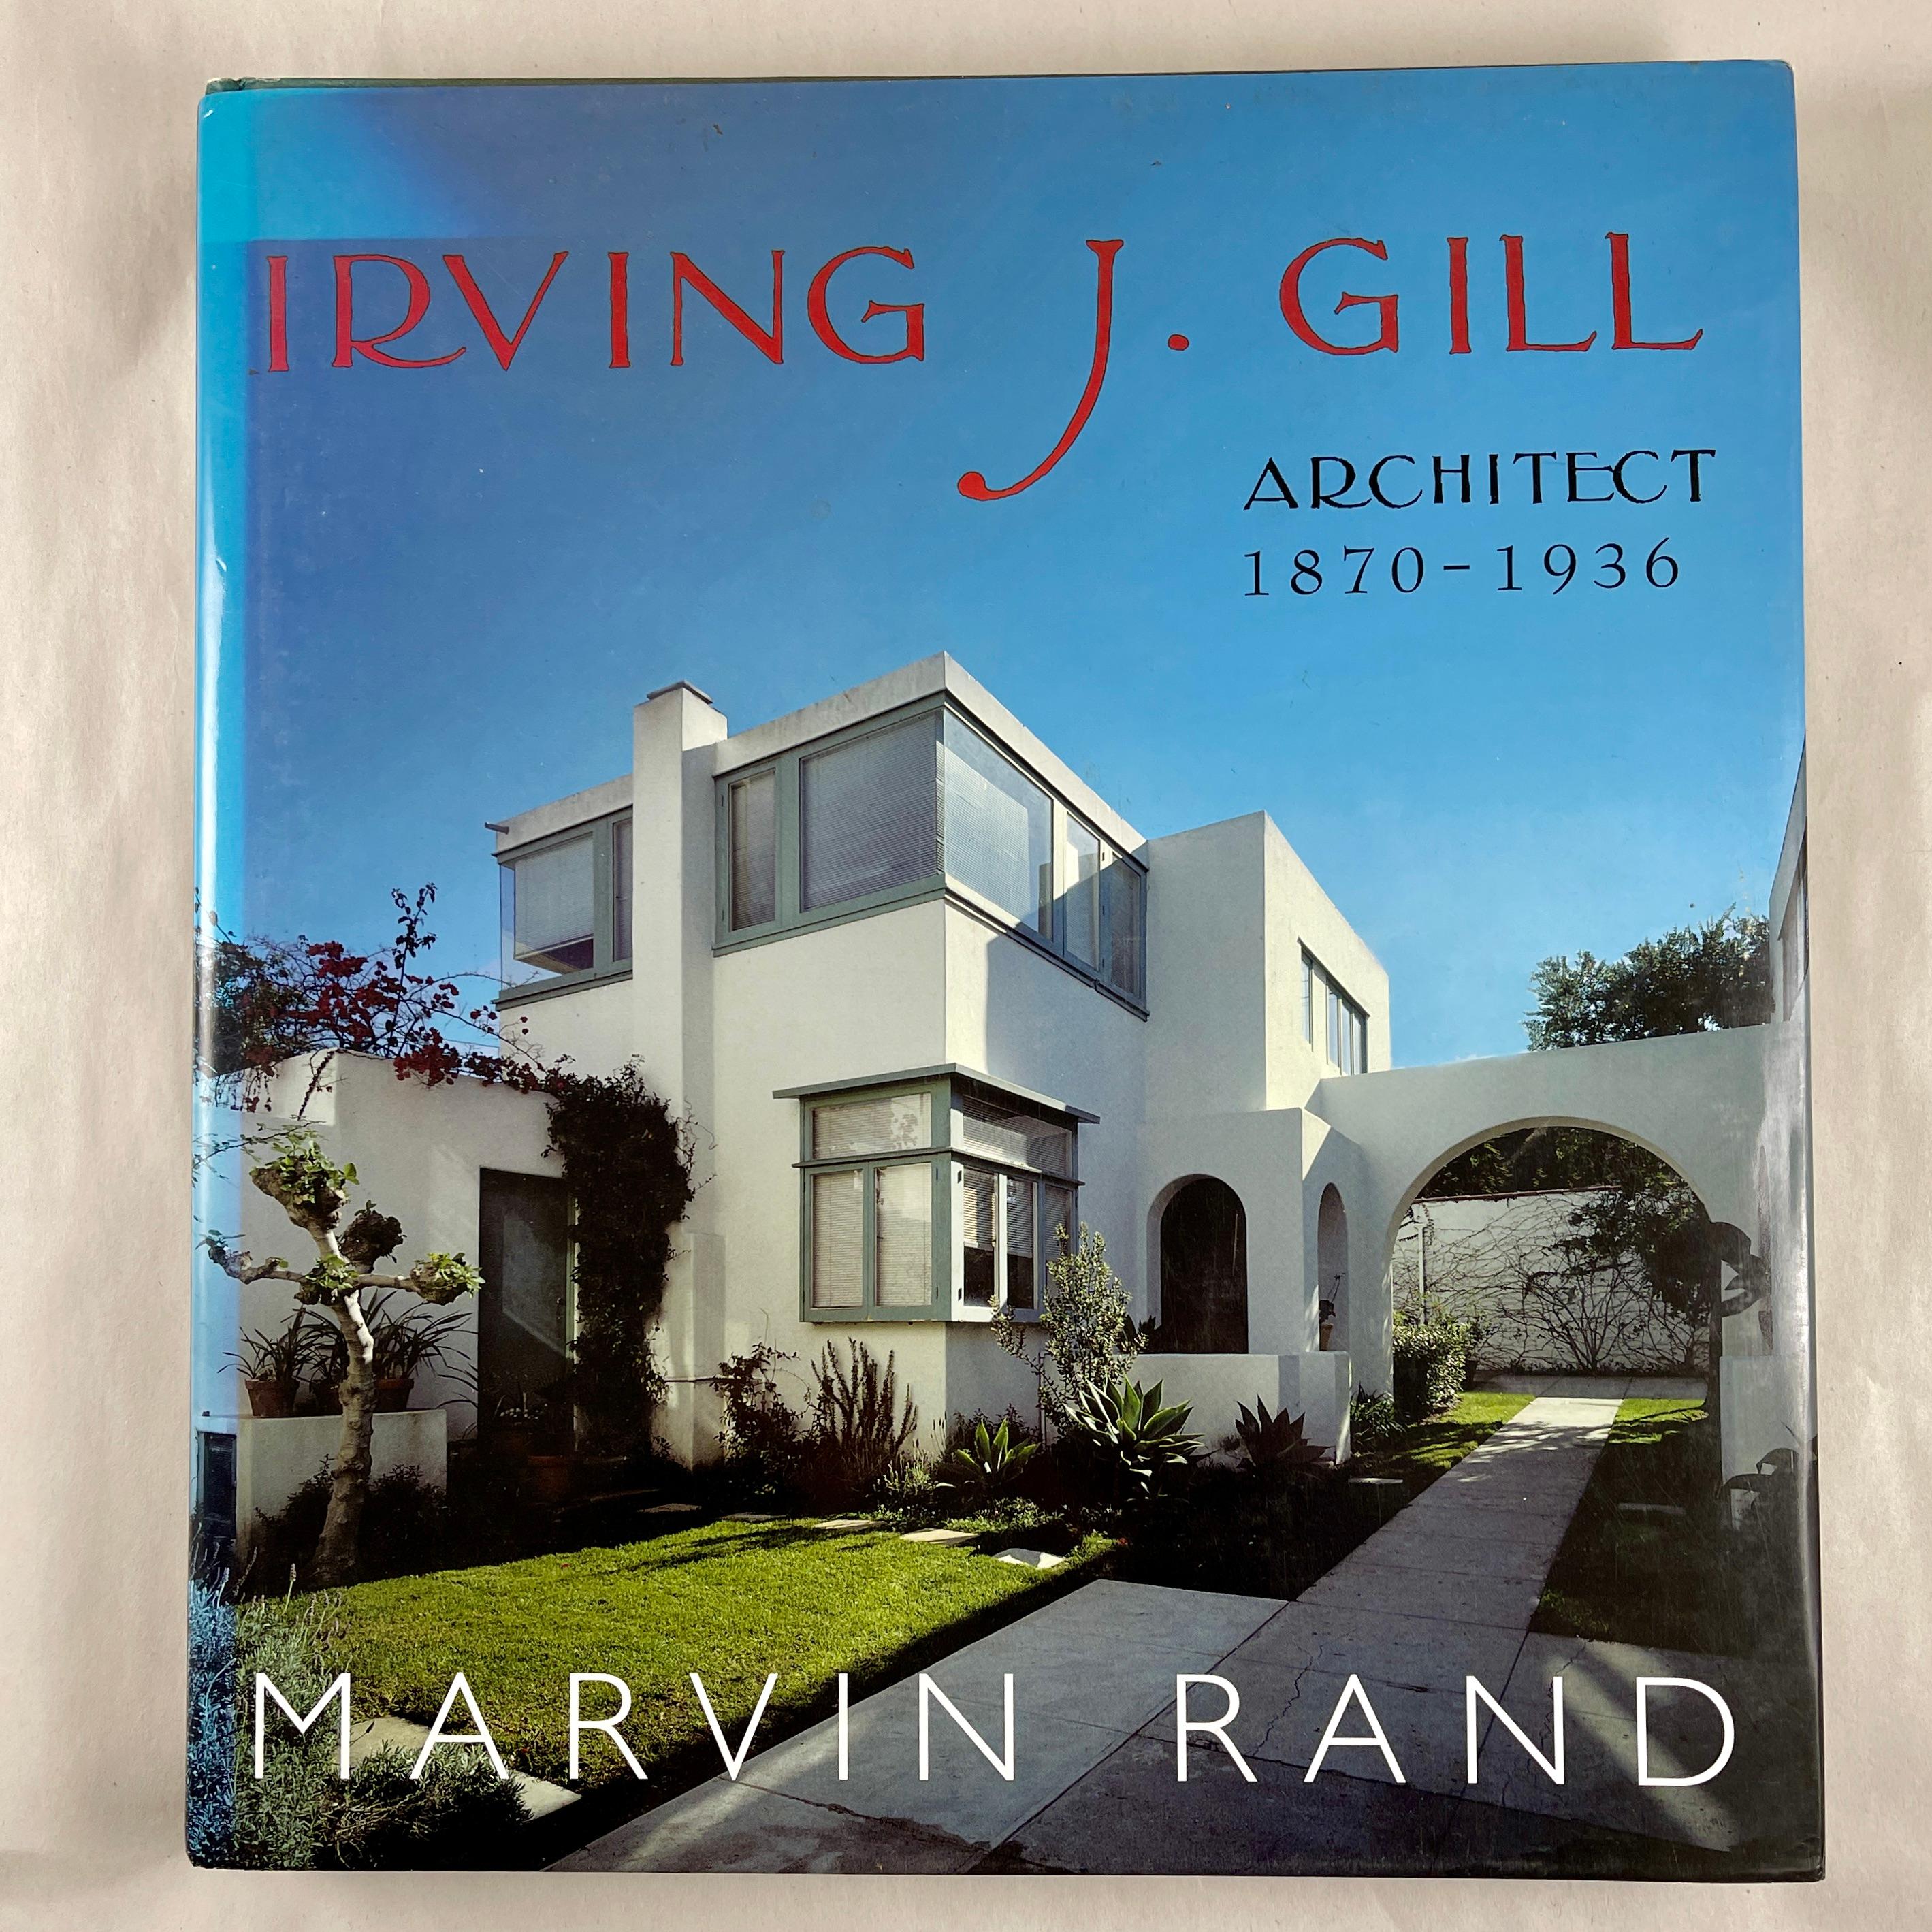 Machine-Made Irving J. Gill, Architect, California Architecture Hardcover Book, 2006 For Sale